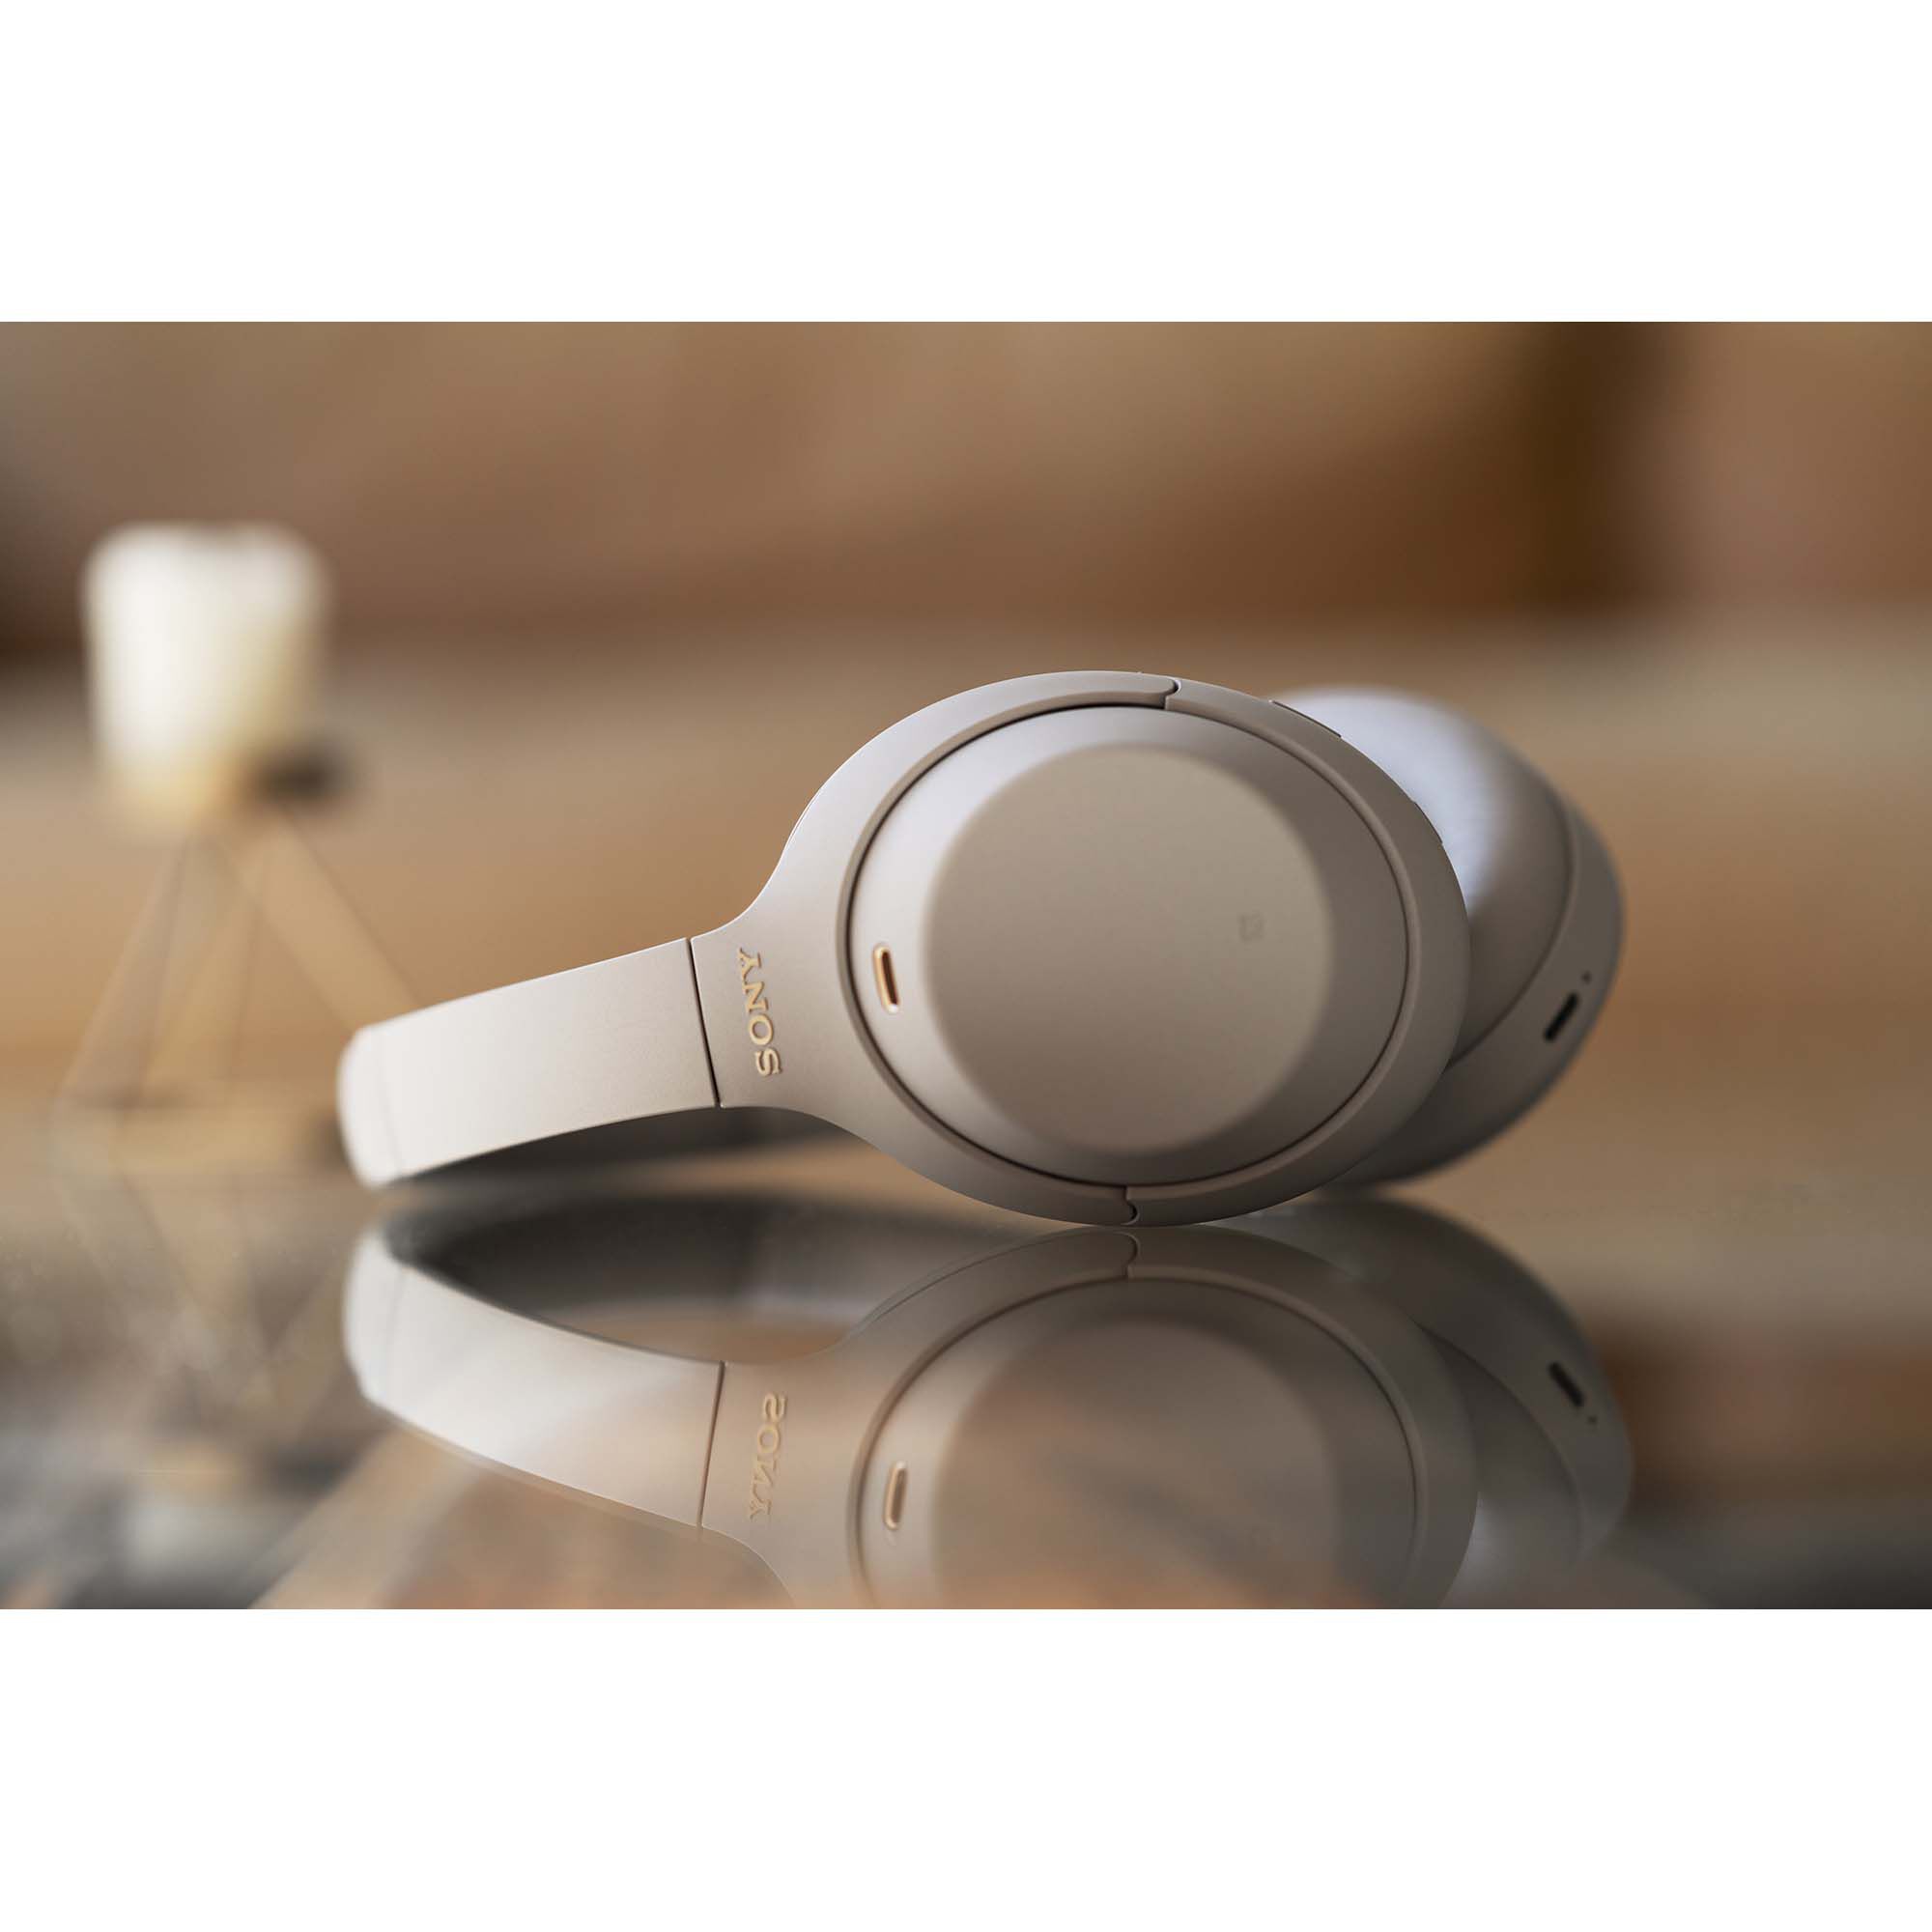 Sony   WHXM4 Wireless Noise Cancelling Over the Ear Headphones   Silver